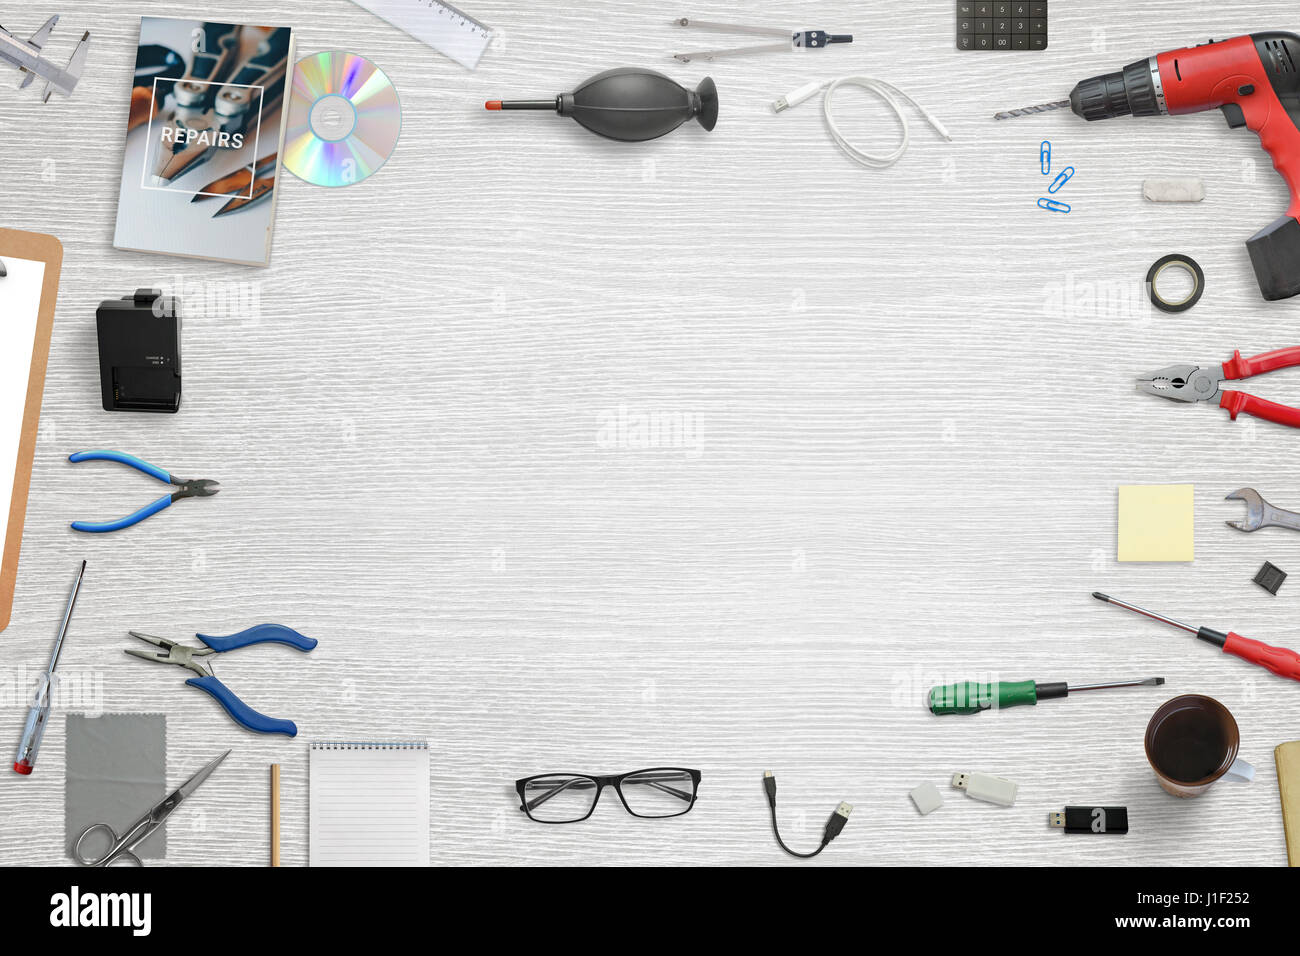 Desk for fix, repair, maintenance electronic devices. Top view with free space for text. Tools beside. Stock Photo